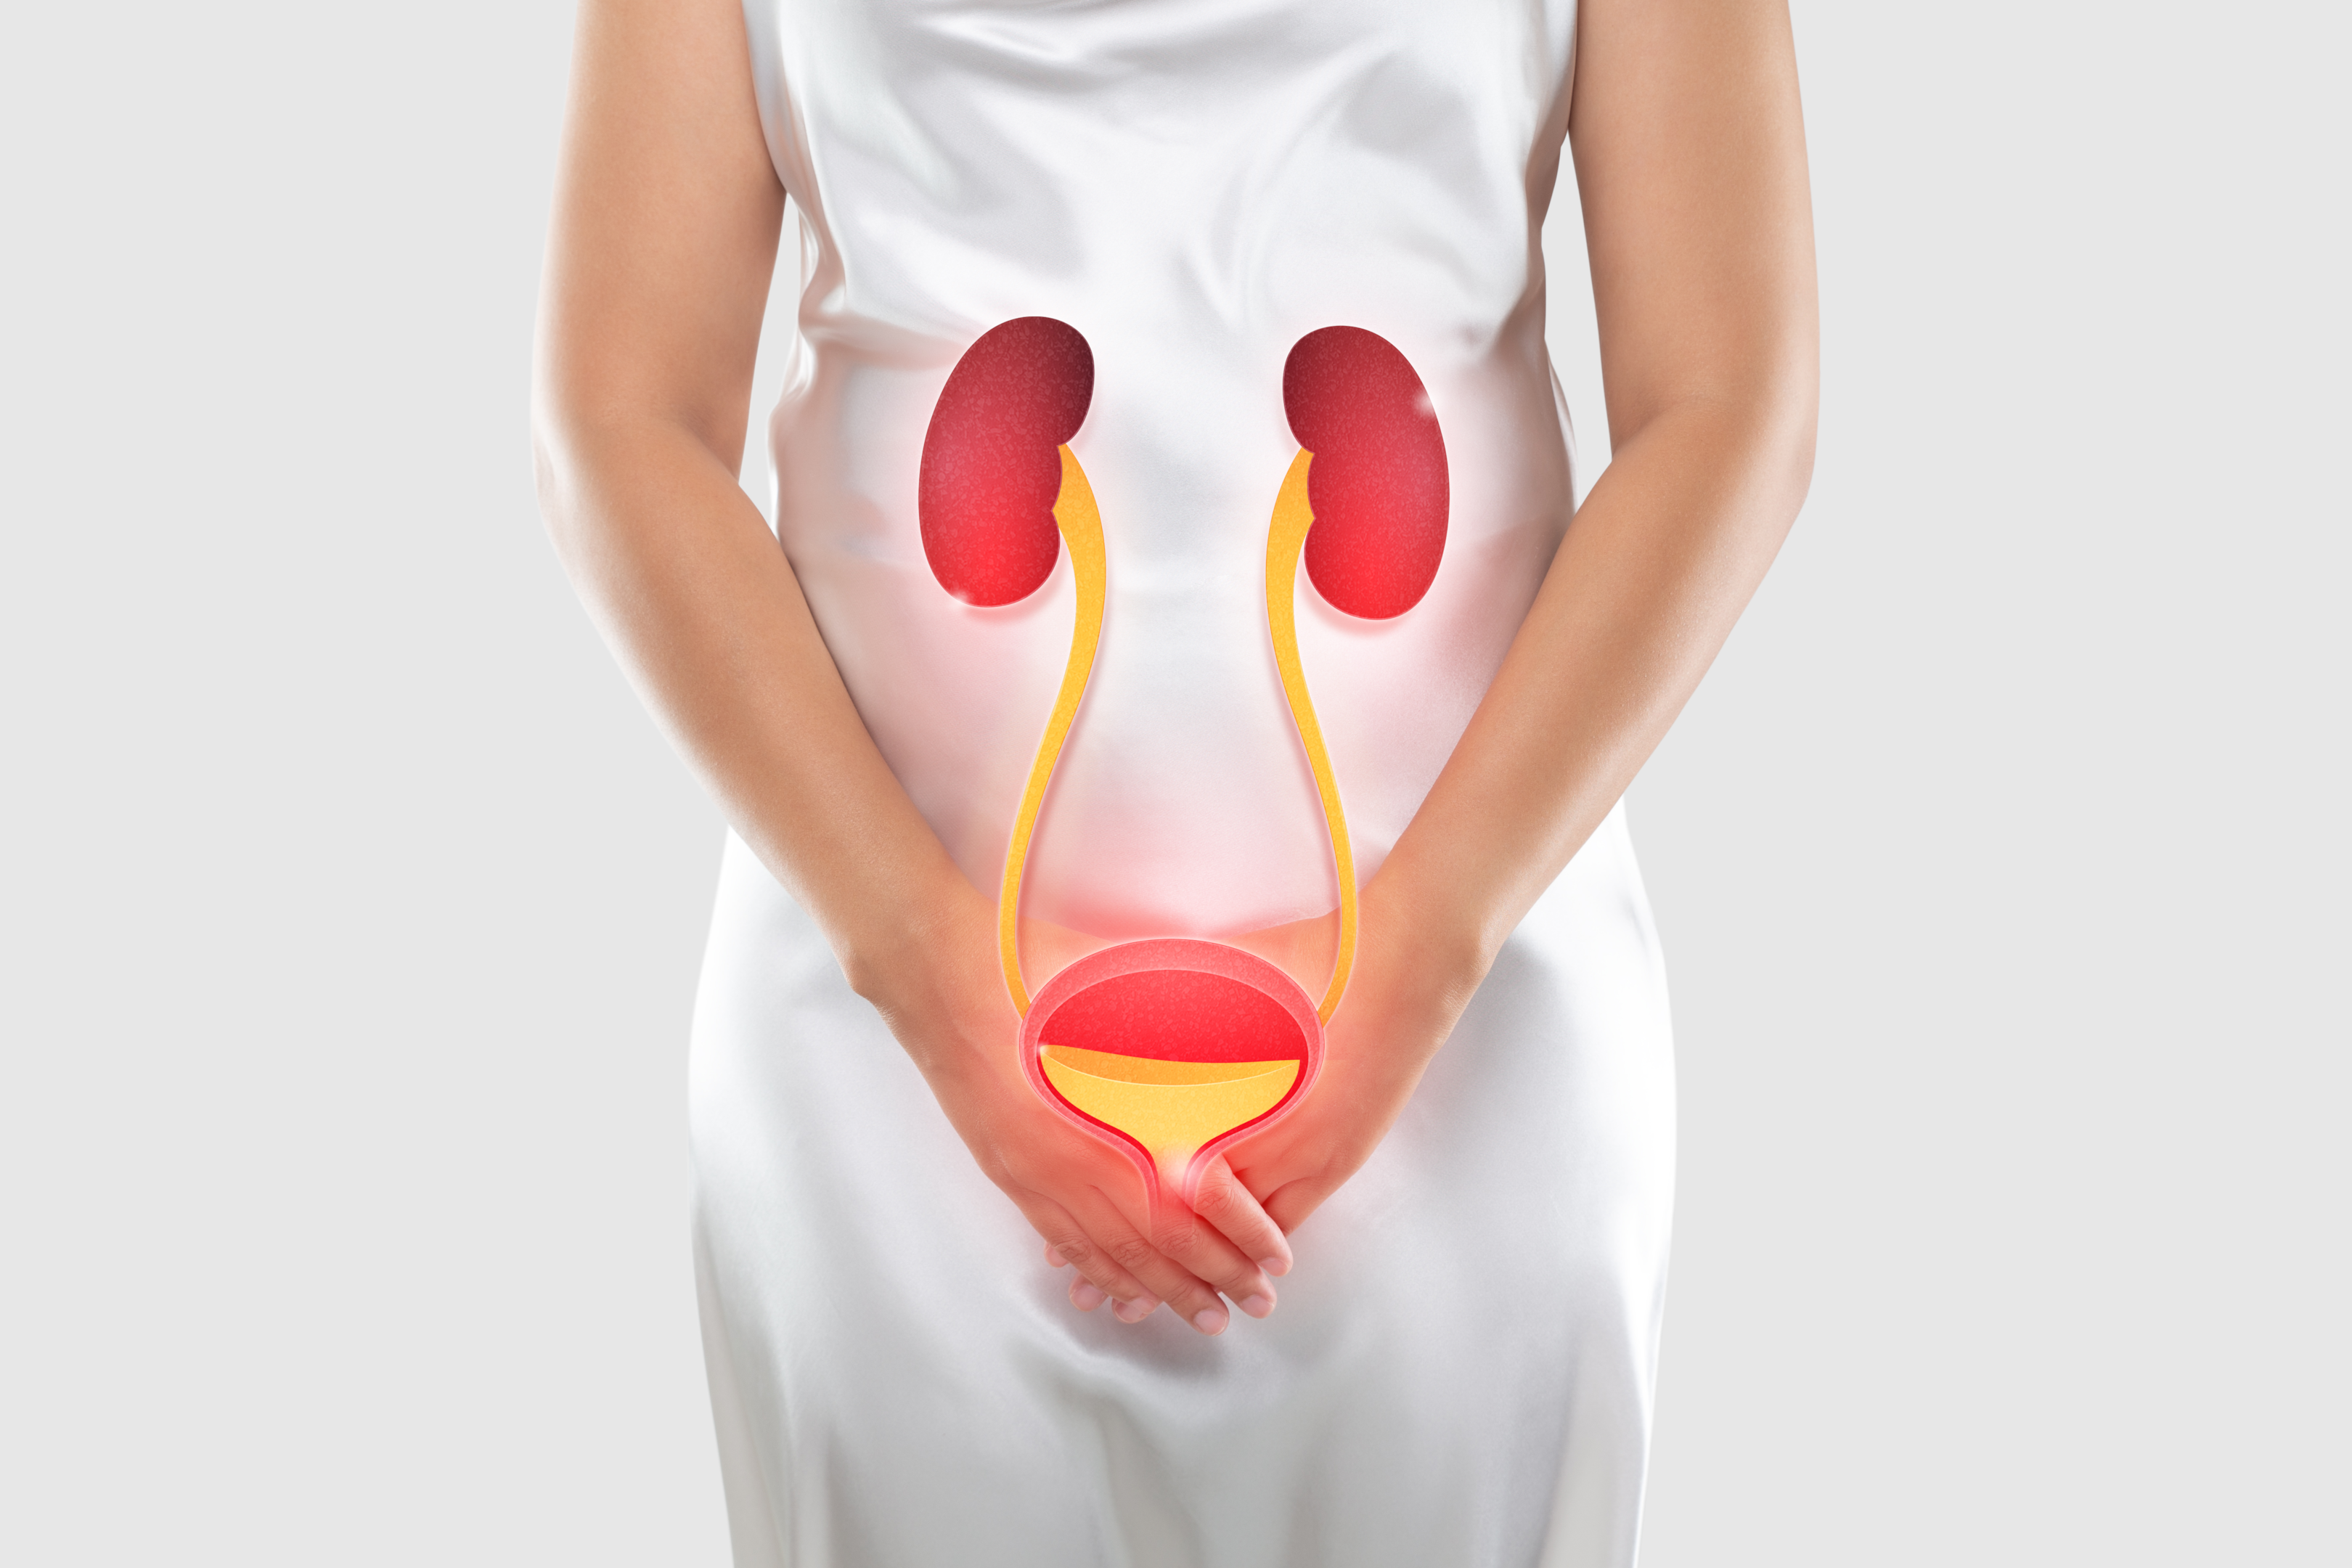 urinary tract infection and a bacterial infection are common and can be similar to symptoms of cystitis 